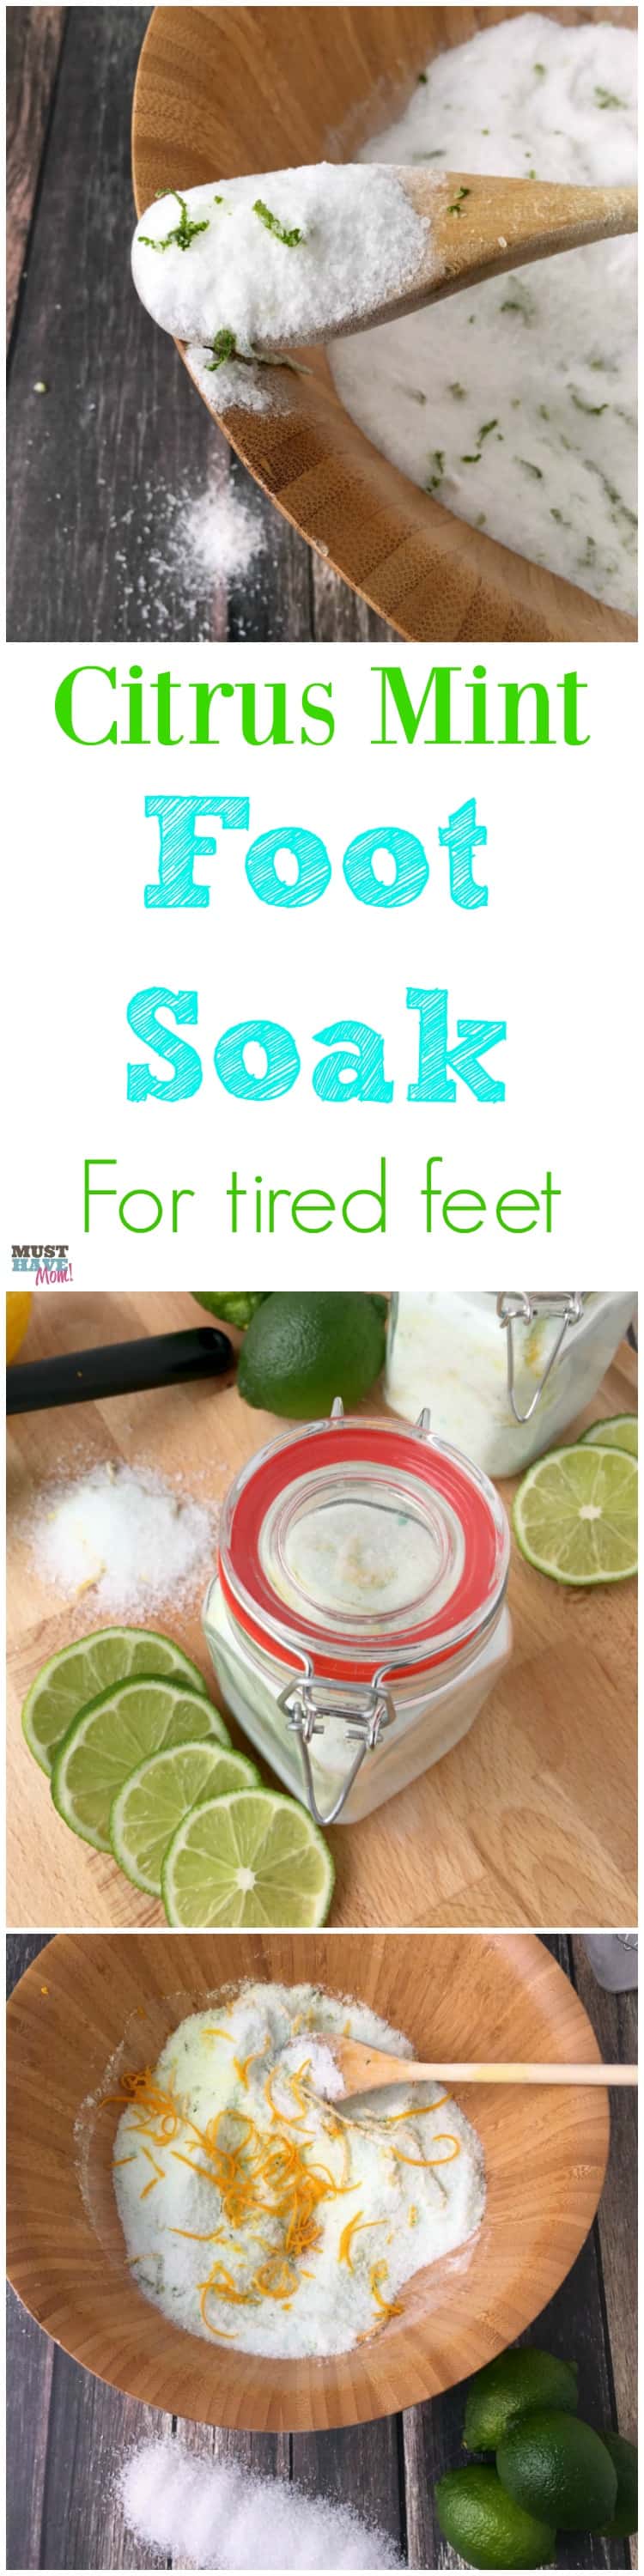 DIY Citrus mint epsom salt foot soak for tired feet! Make this homemade foot soak recipe and package in a pretty jar for a great homemade gift idea! Or make it part of a pedicure basket! Great Mother's Day gift, teacher gift idea, etc!